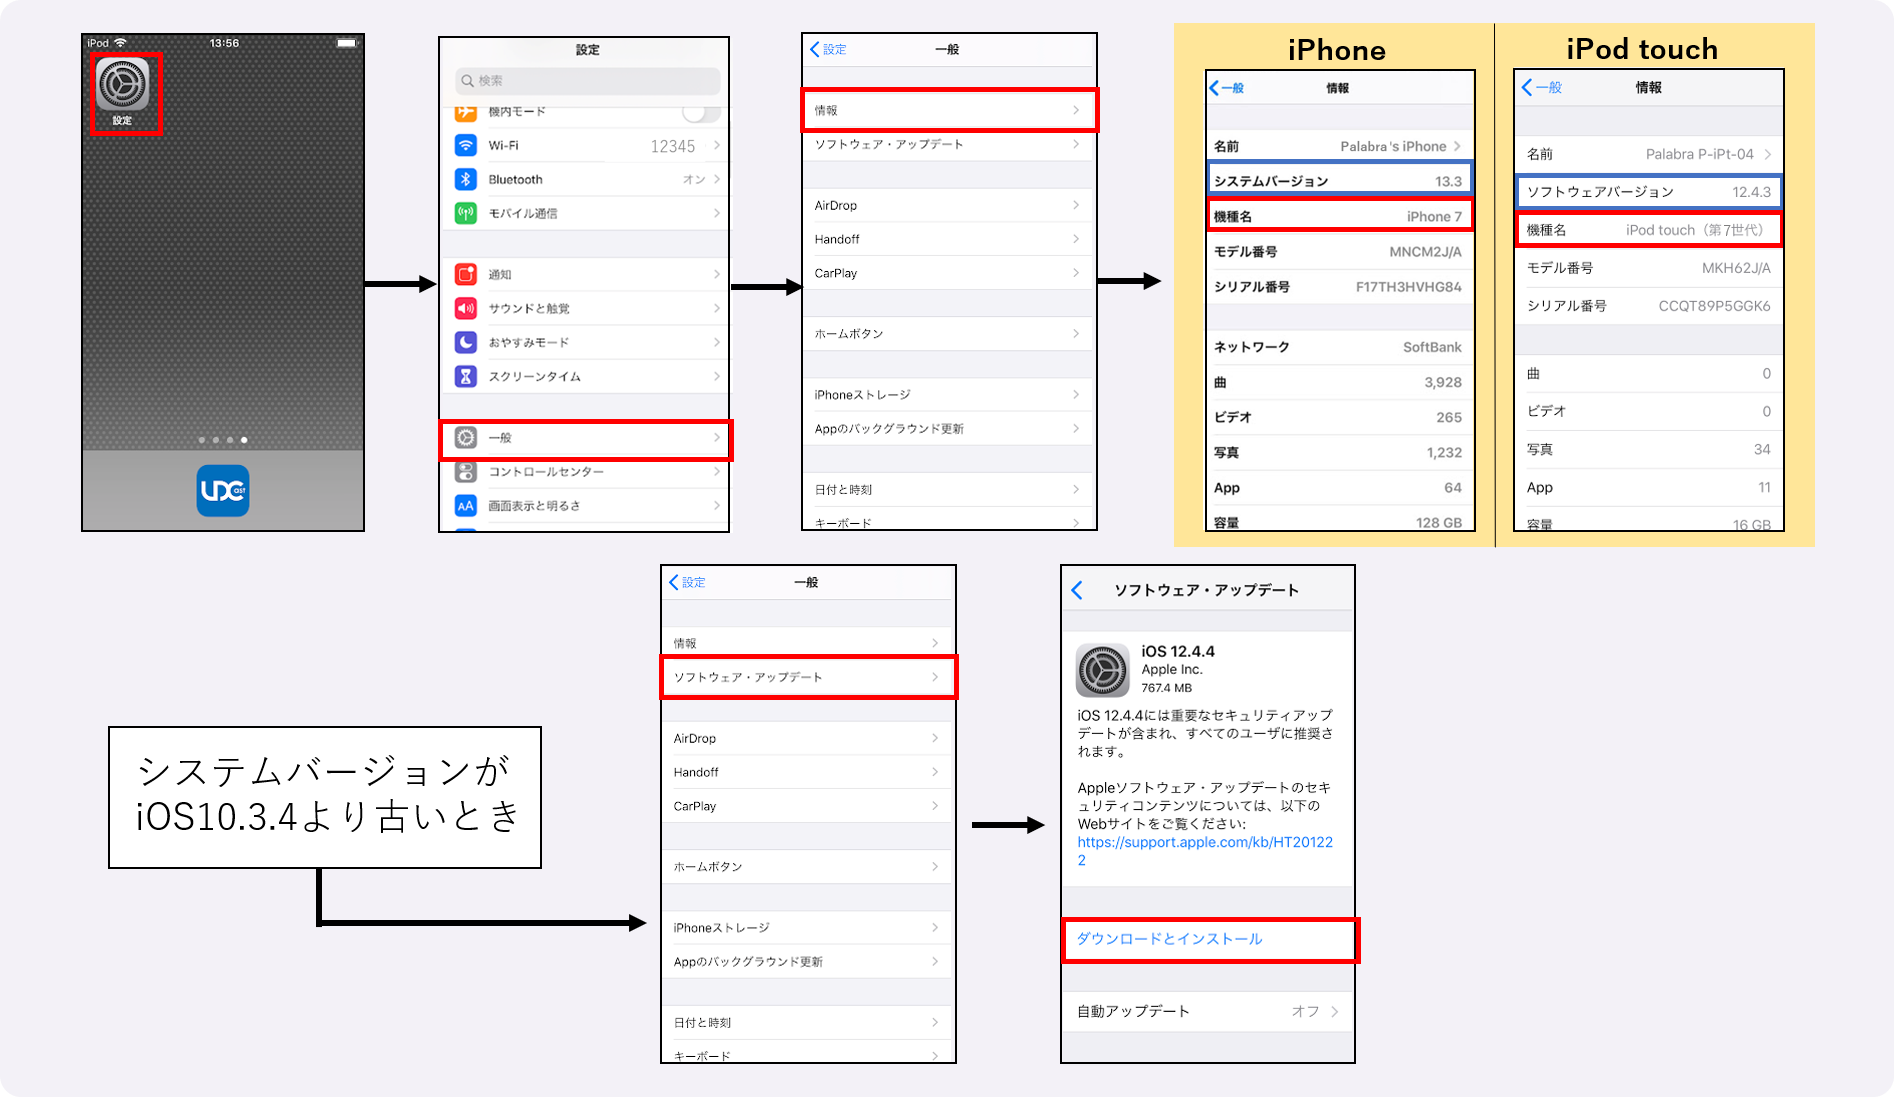 iPhone・iPod touchの動作環境の調べ方